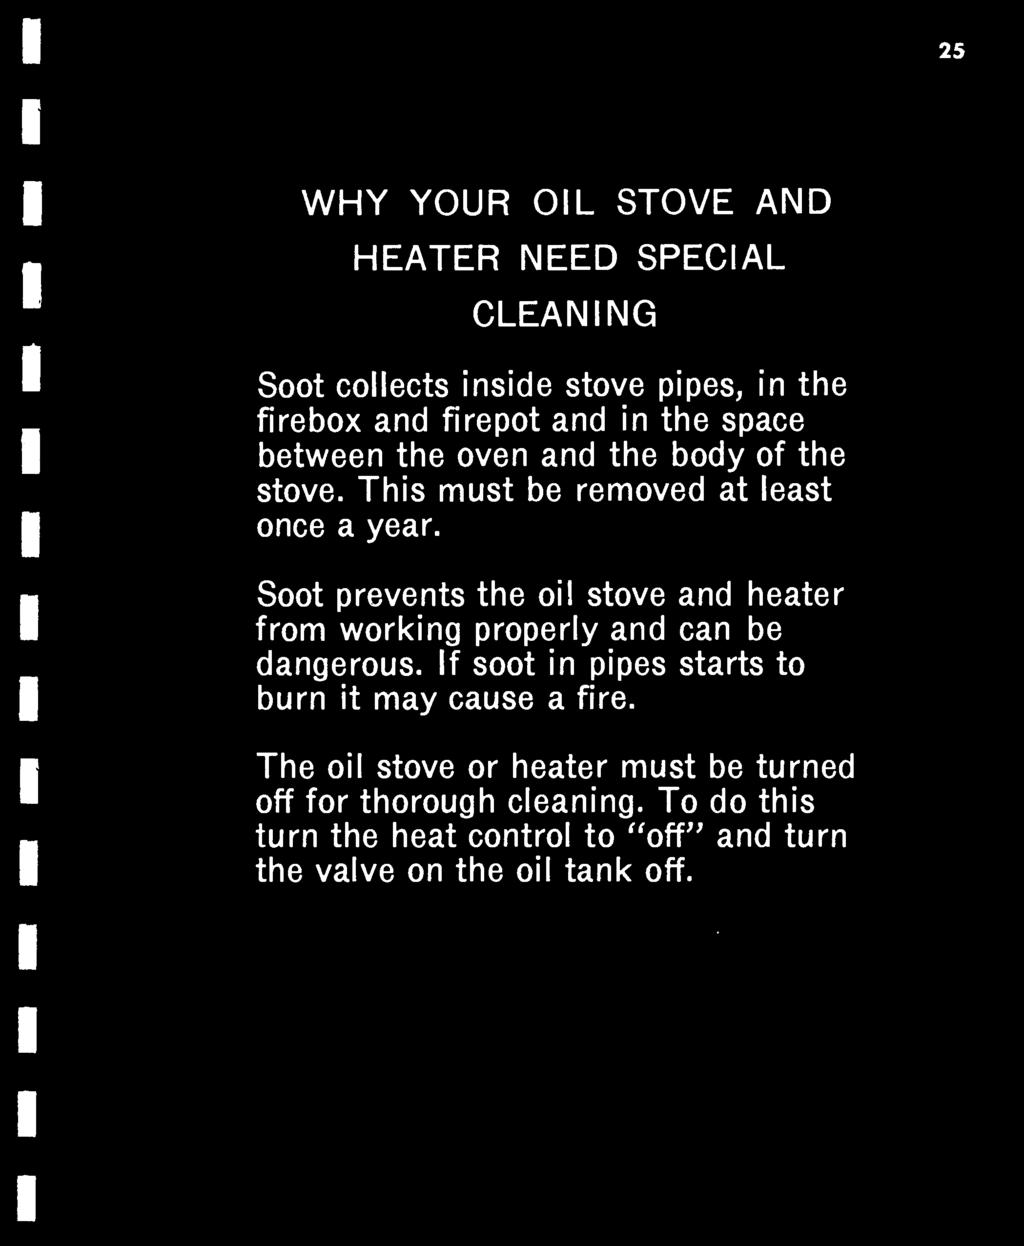 Soot prevents the oil stove and heater from working properly and can be dangerous.